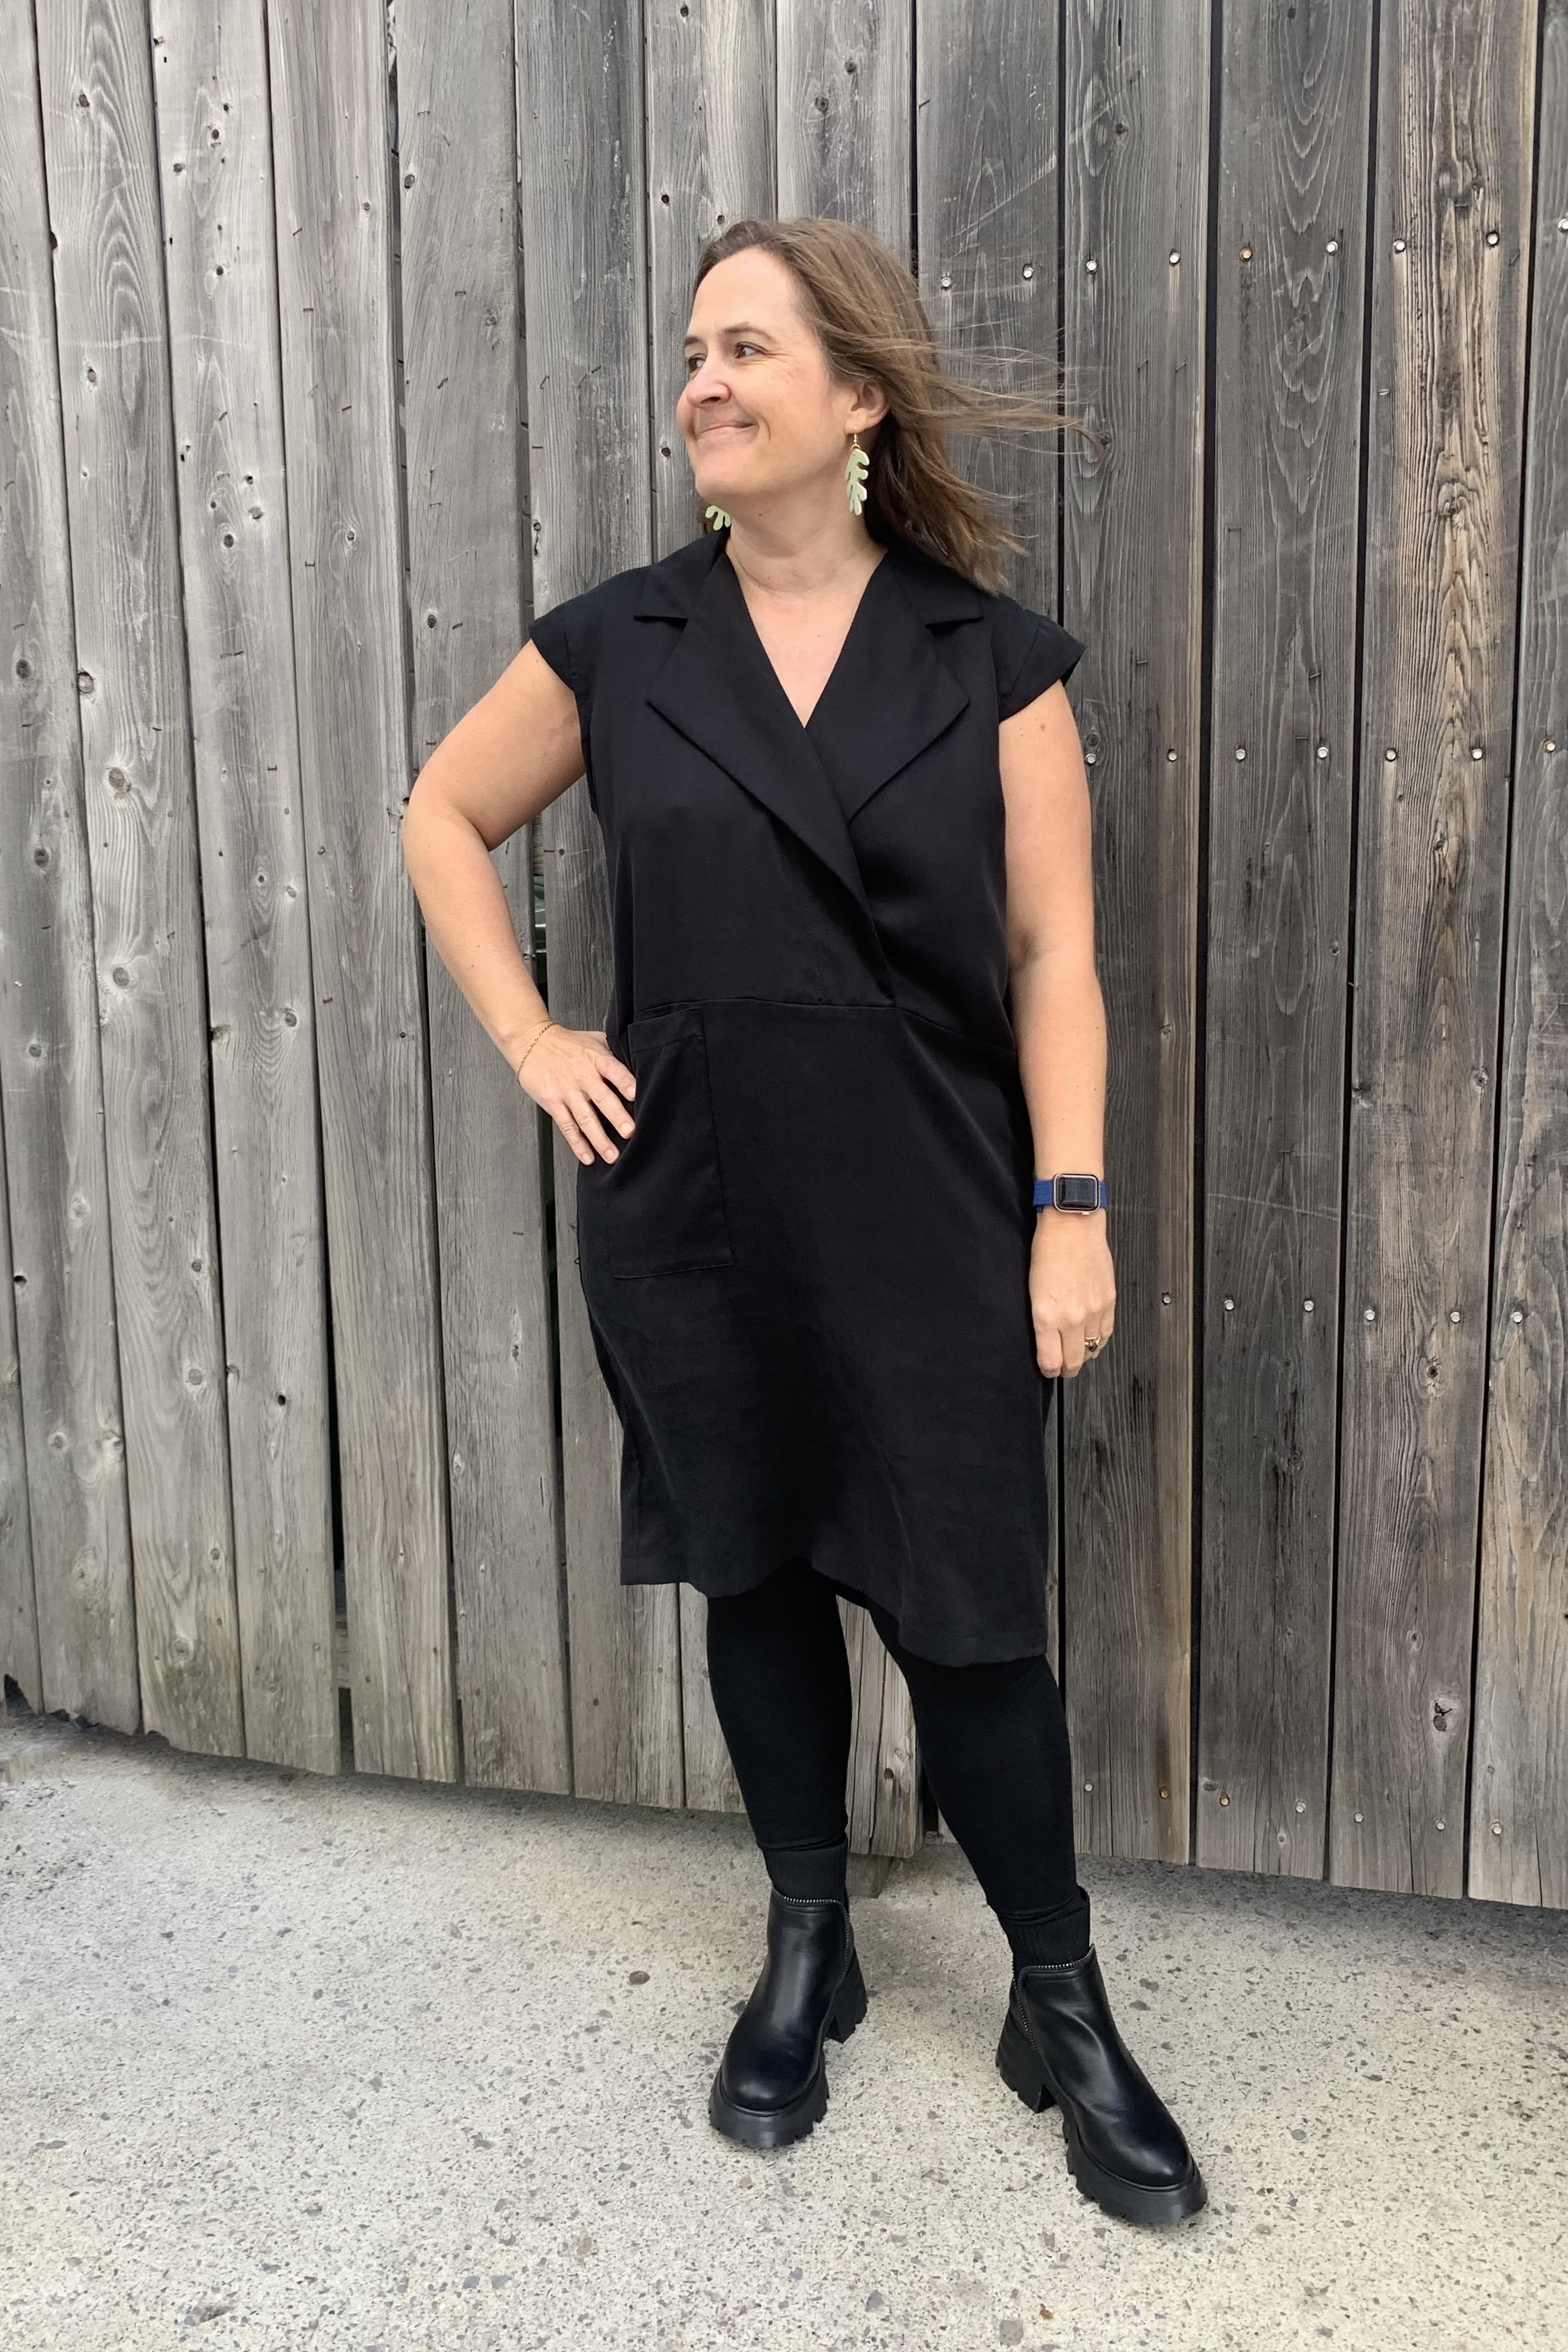 Frida Dress by Melow, Black, straight cut, cap sleeves, tailored collar, box pleat and yoke at back, patch pocket, eco fabric, sizes XS to XXL, made in Quebec